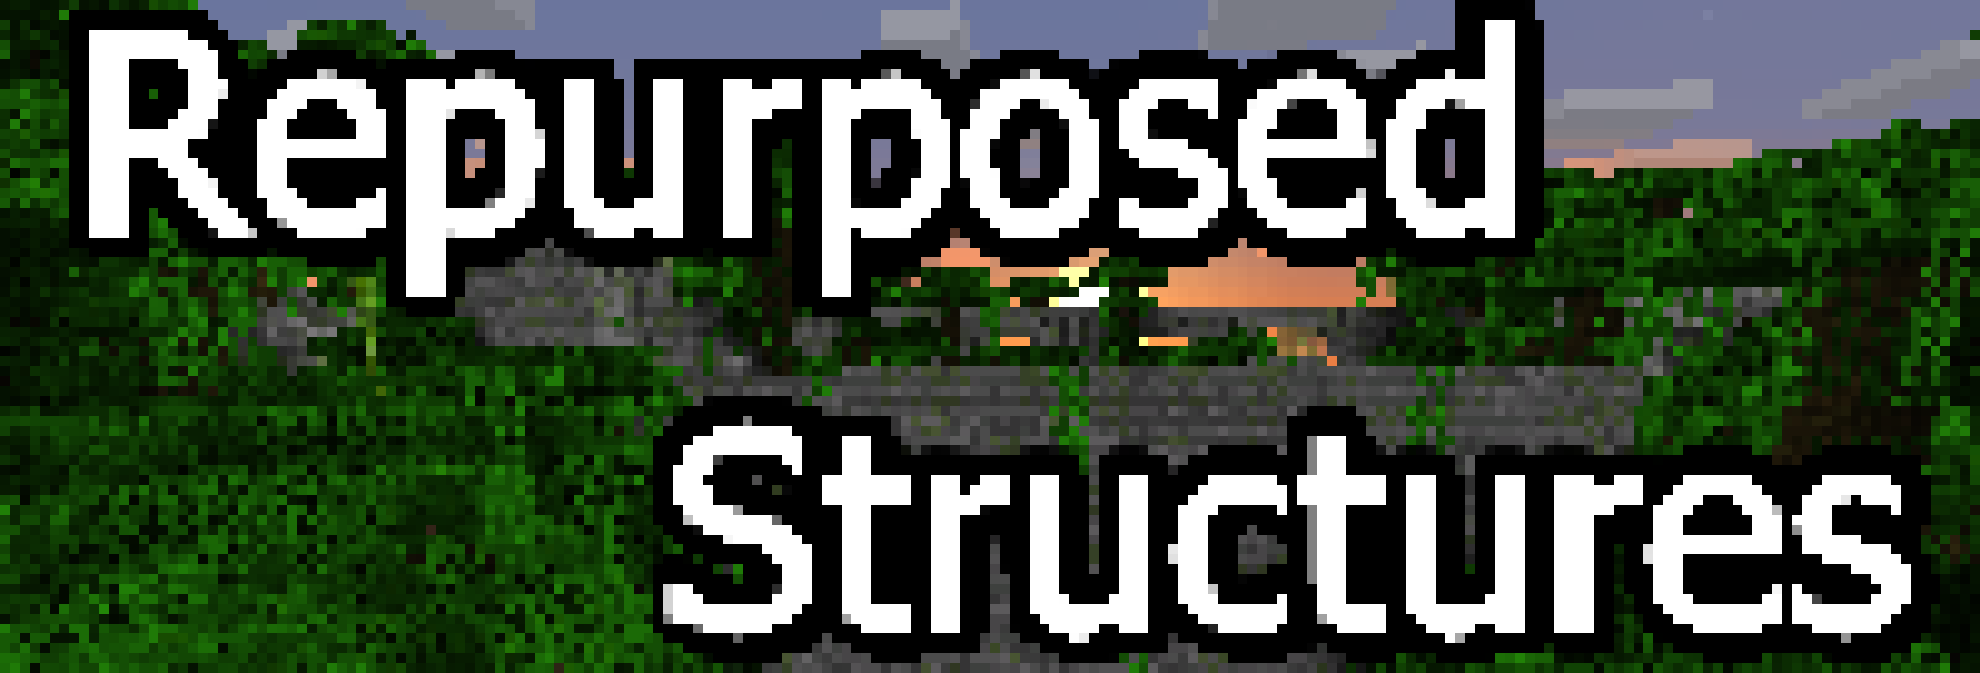 Picture that shows the title of this mod with a Stonebrick Fortress during sunset behind the text